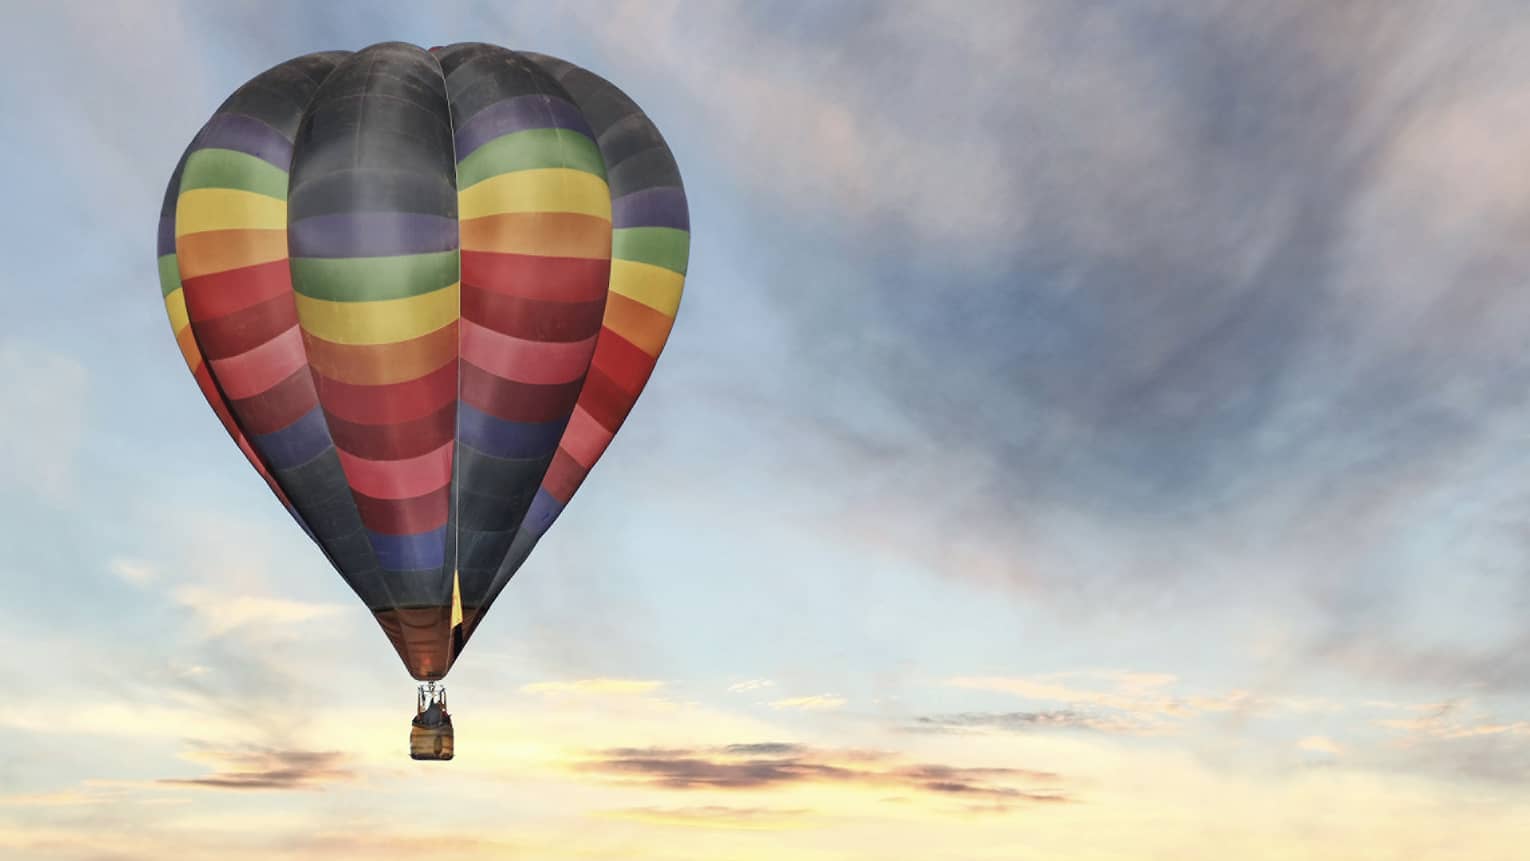 Rainbow-striped hot air balloon floats in the sky at sunset